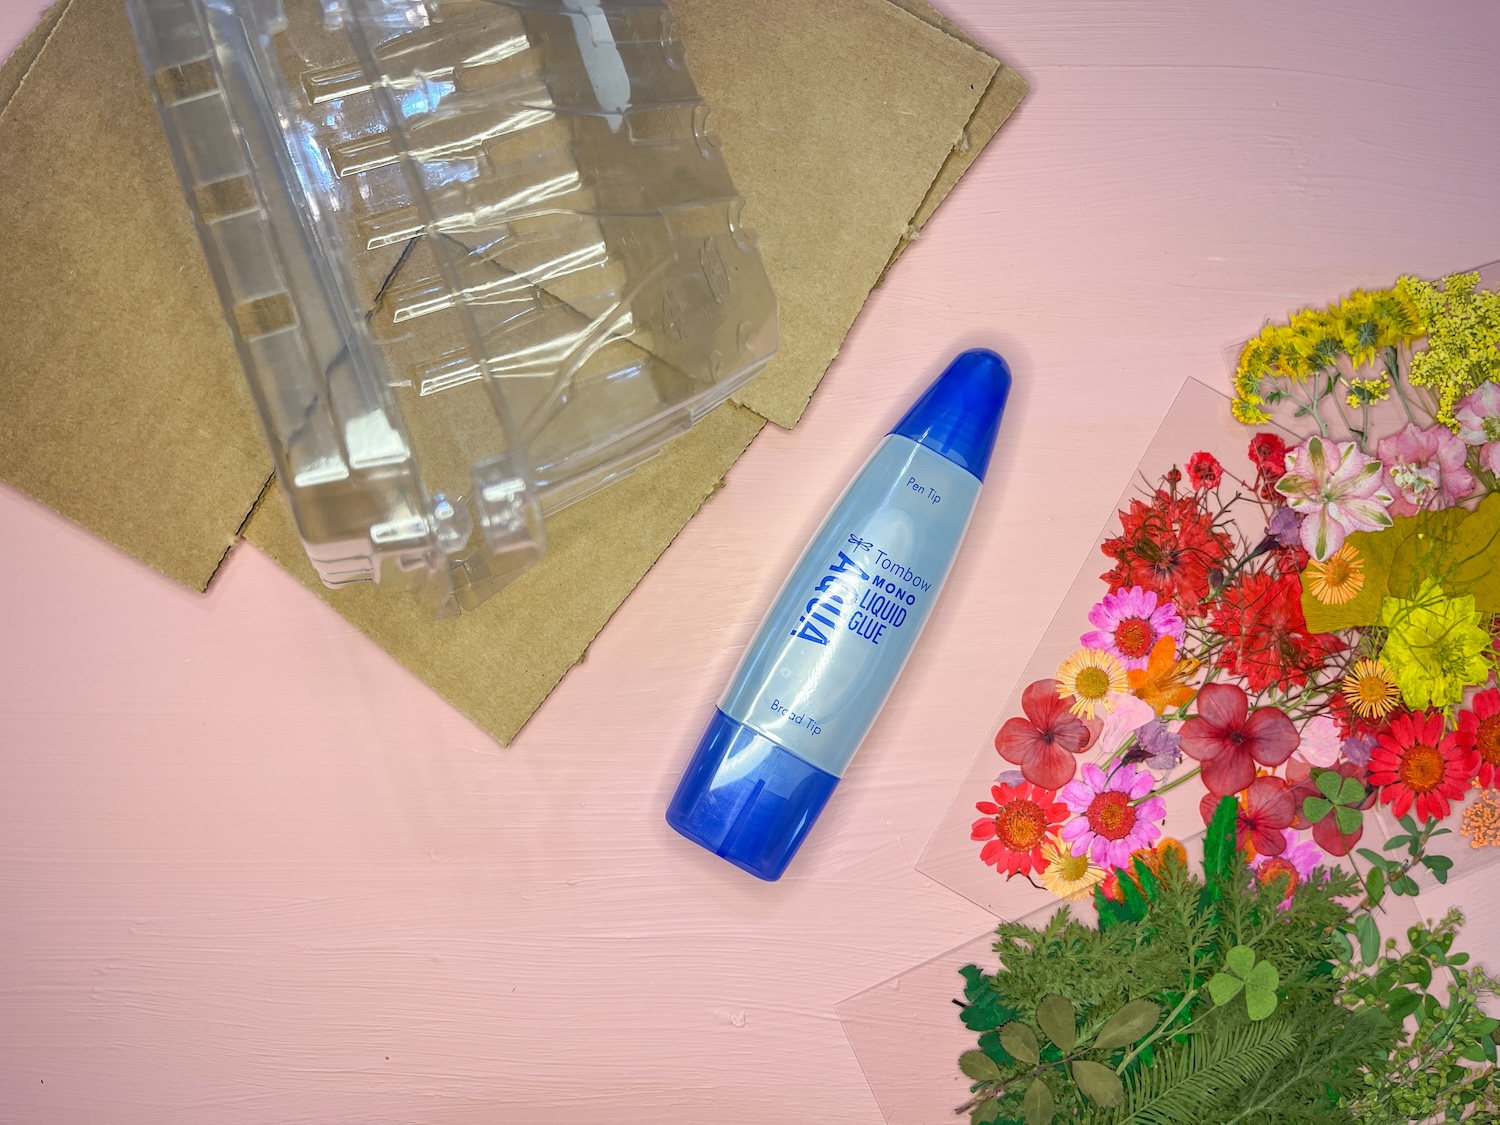 Supplies you'll need to make DIY Dried Flower Bookmarks from Recycled Packaging, cardboard or plastic packaging, Tombow MONO Aqua Liquid Glue, & Dried Flowers